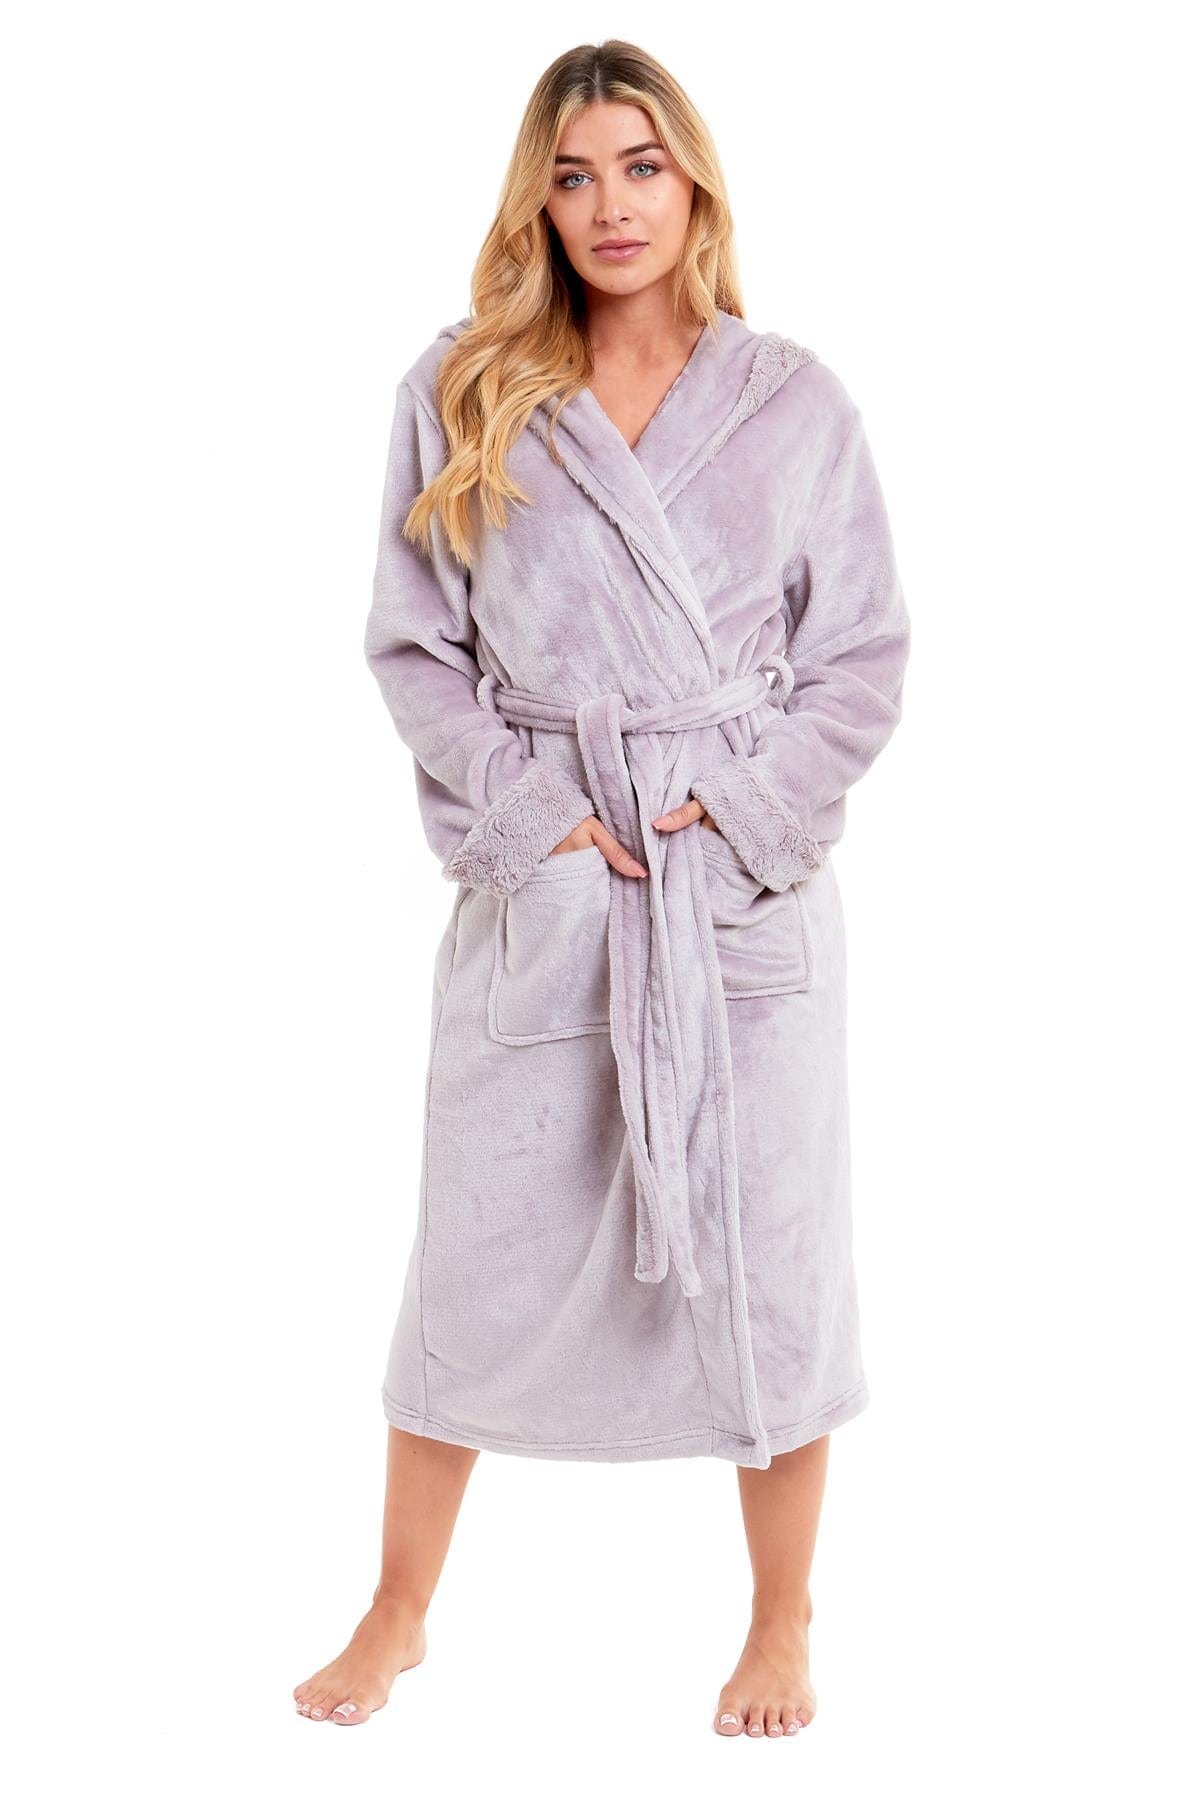 women s faux fur hooded robe dressing gown bath robe super soft luxury gowns olivia rocco dressing gown 29145735495752